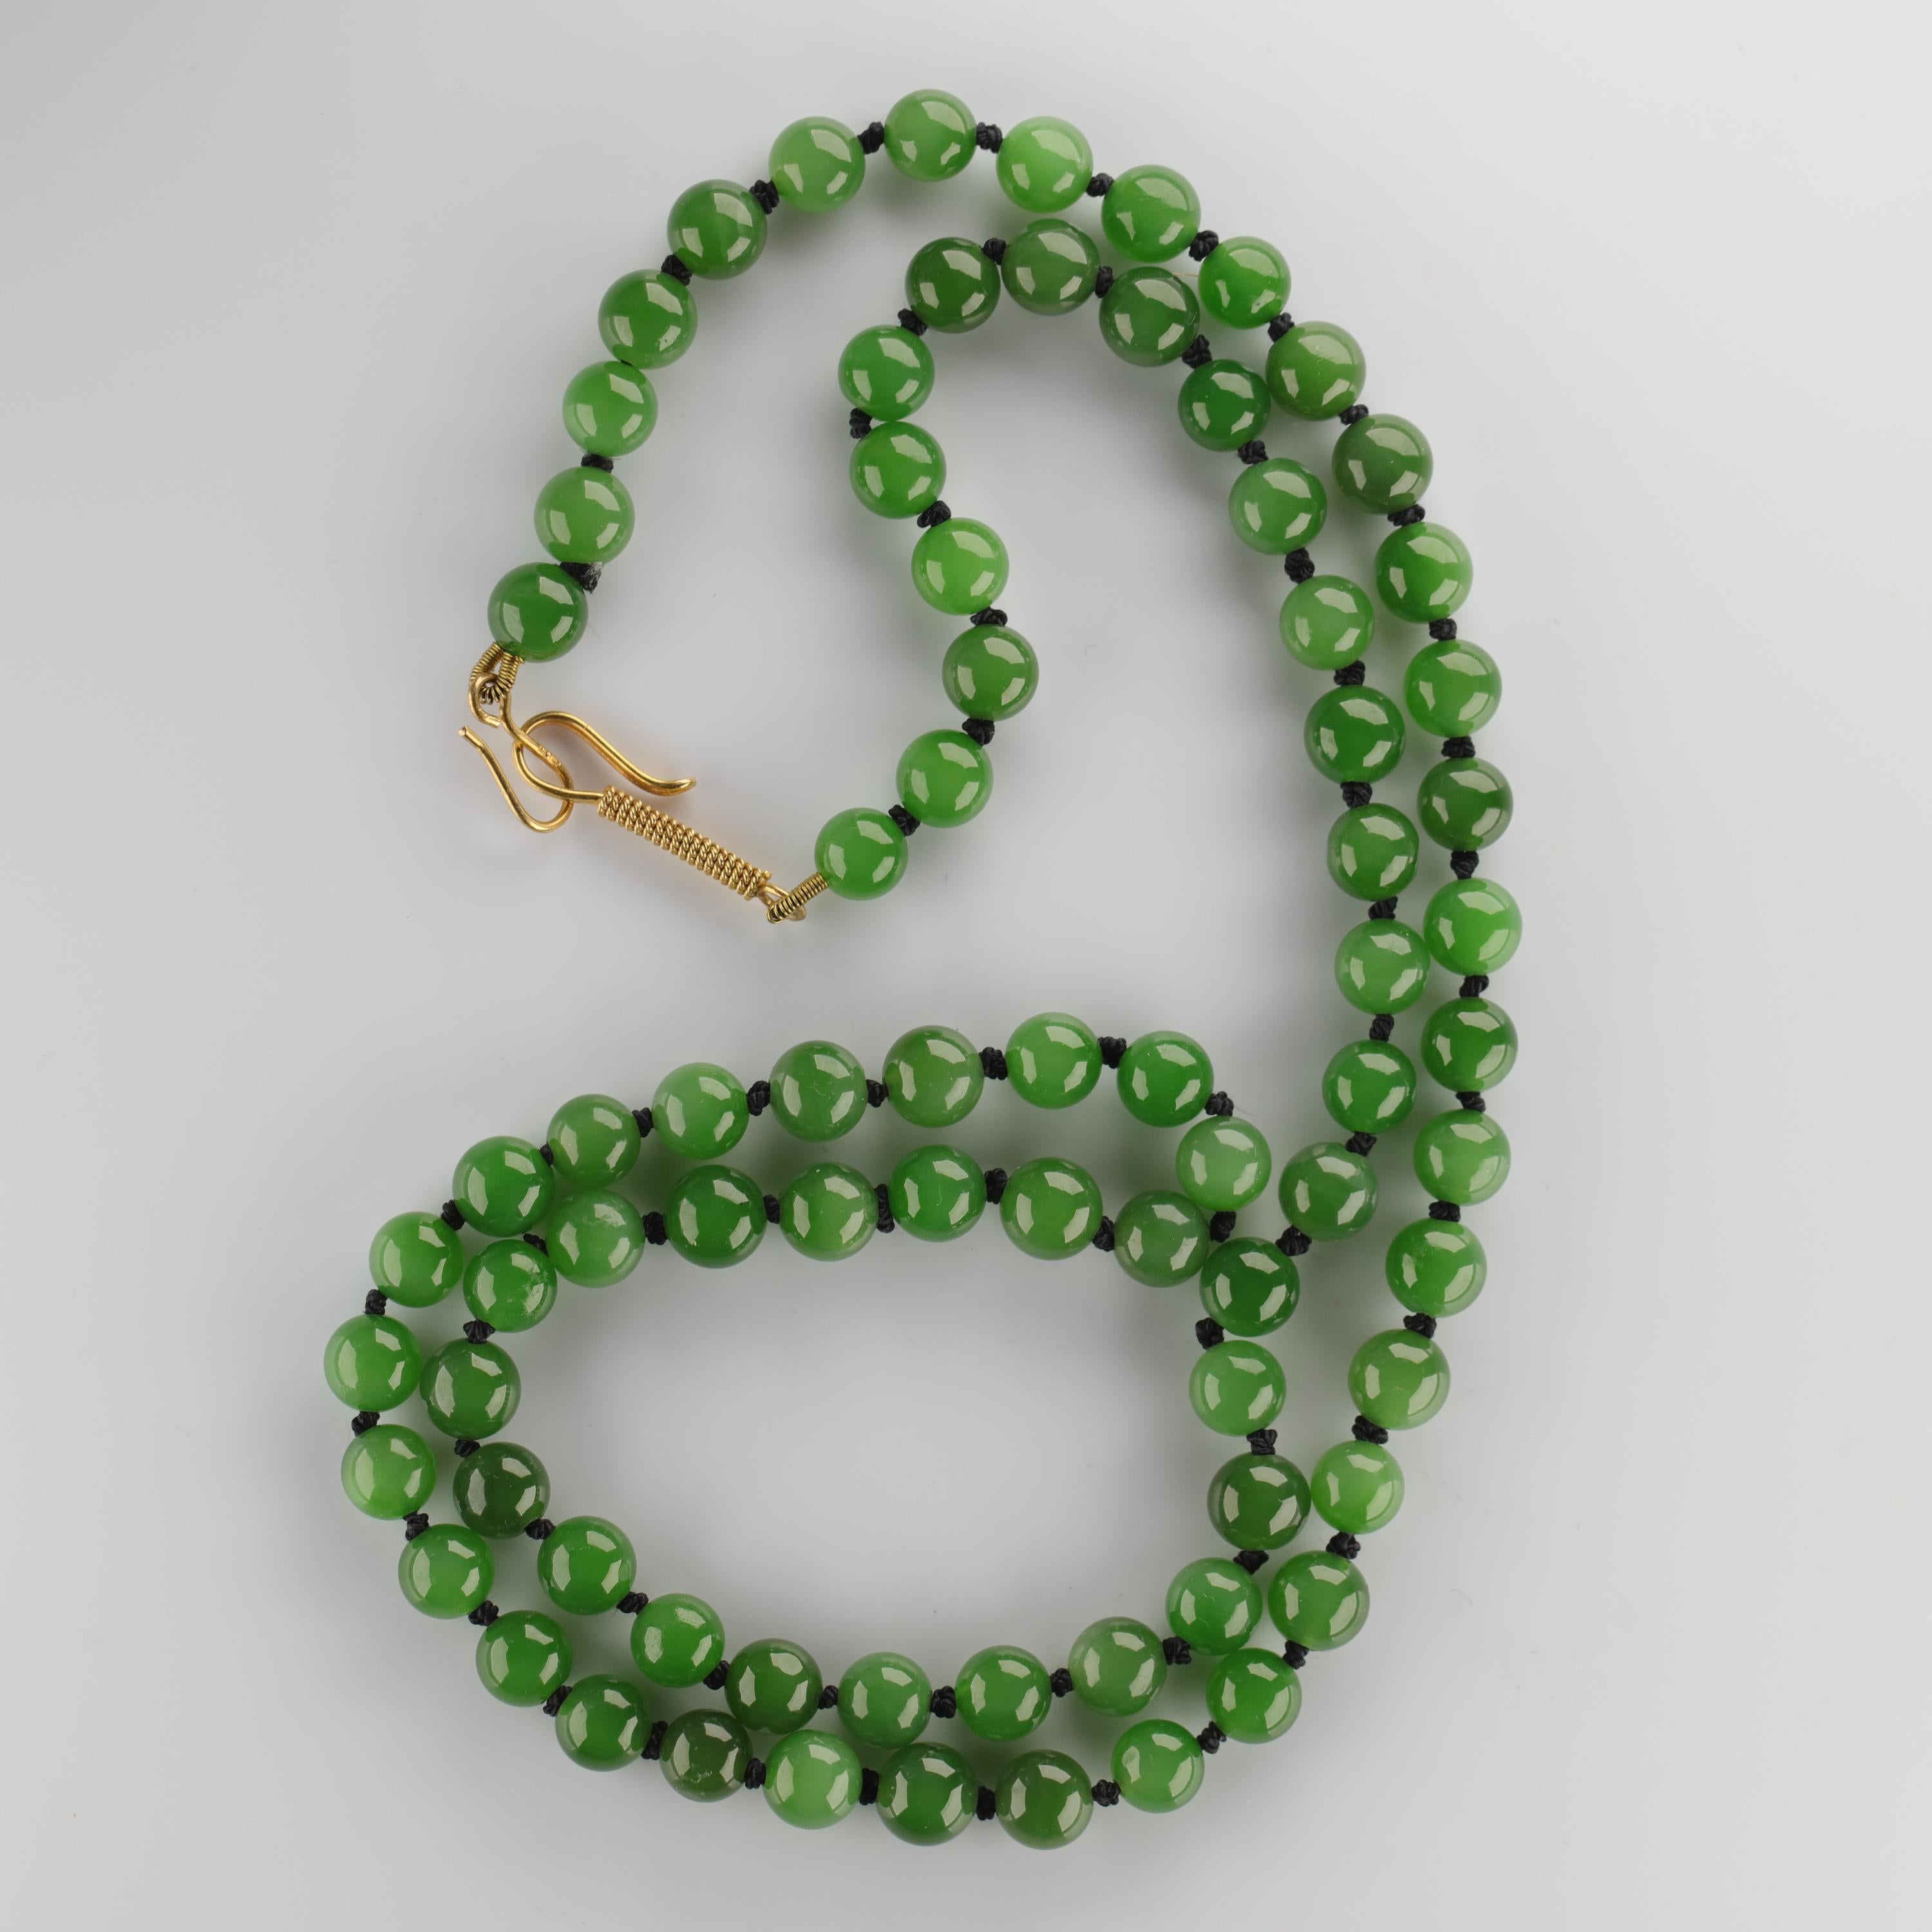 These jade beads are indescribably luminous. As a second-generation collector of jade, I have been around the stone my entire life and yet when I saw these beads I was in awe, for they possess a quality so rare it is almost never seen in jade: